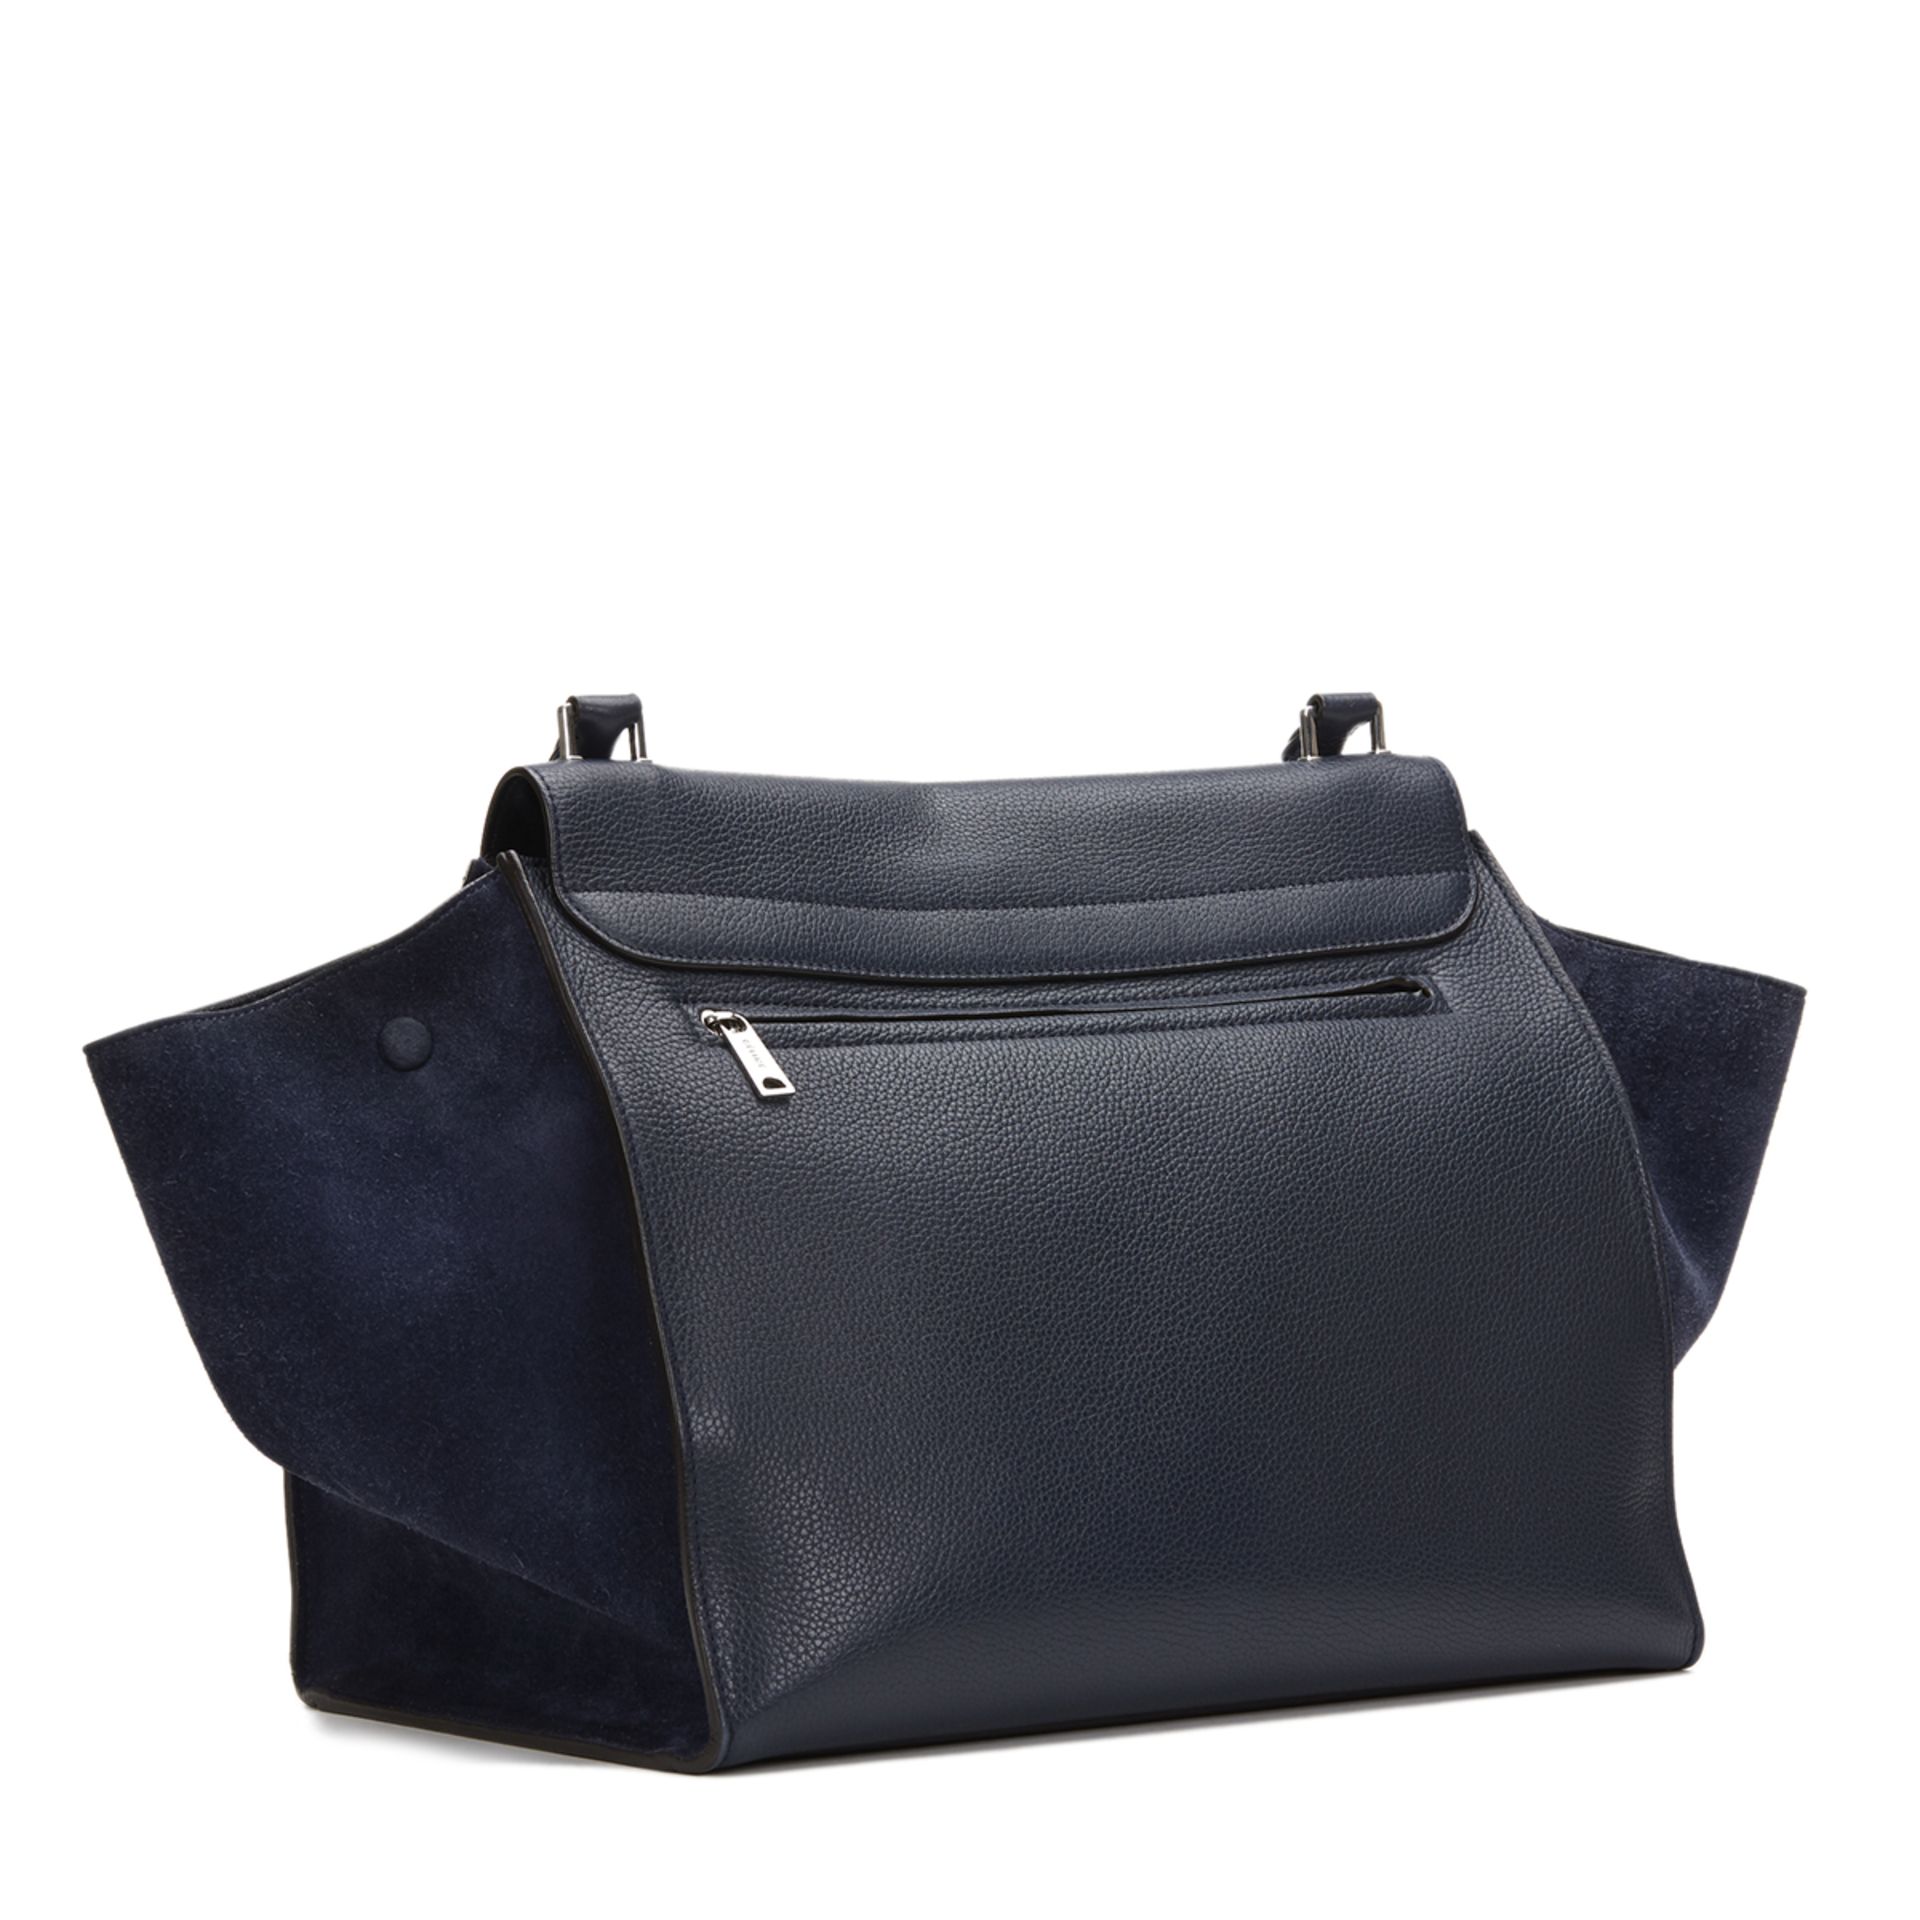 Céline Navy Drummed Calfskin Leather & Suede Large Trapeze - Image 5 of 10